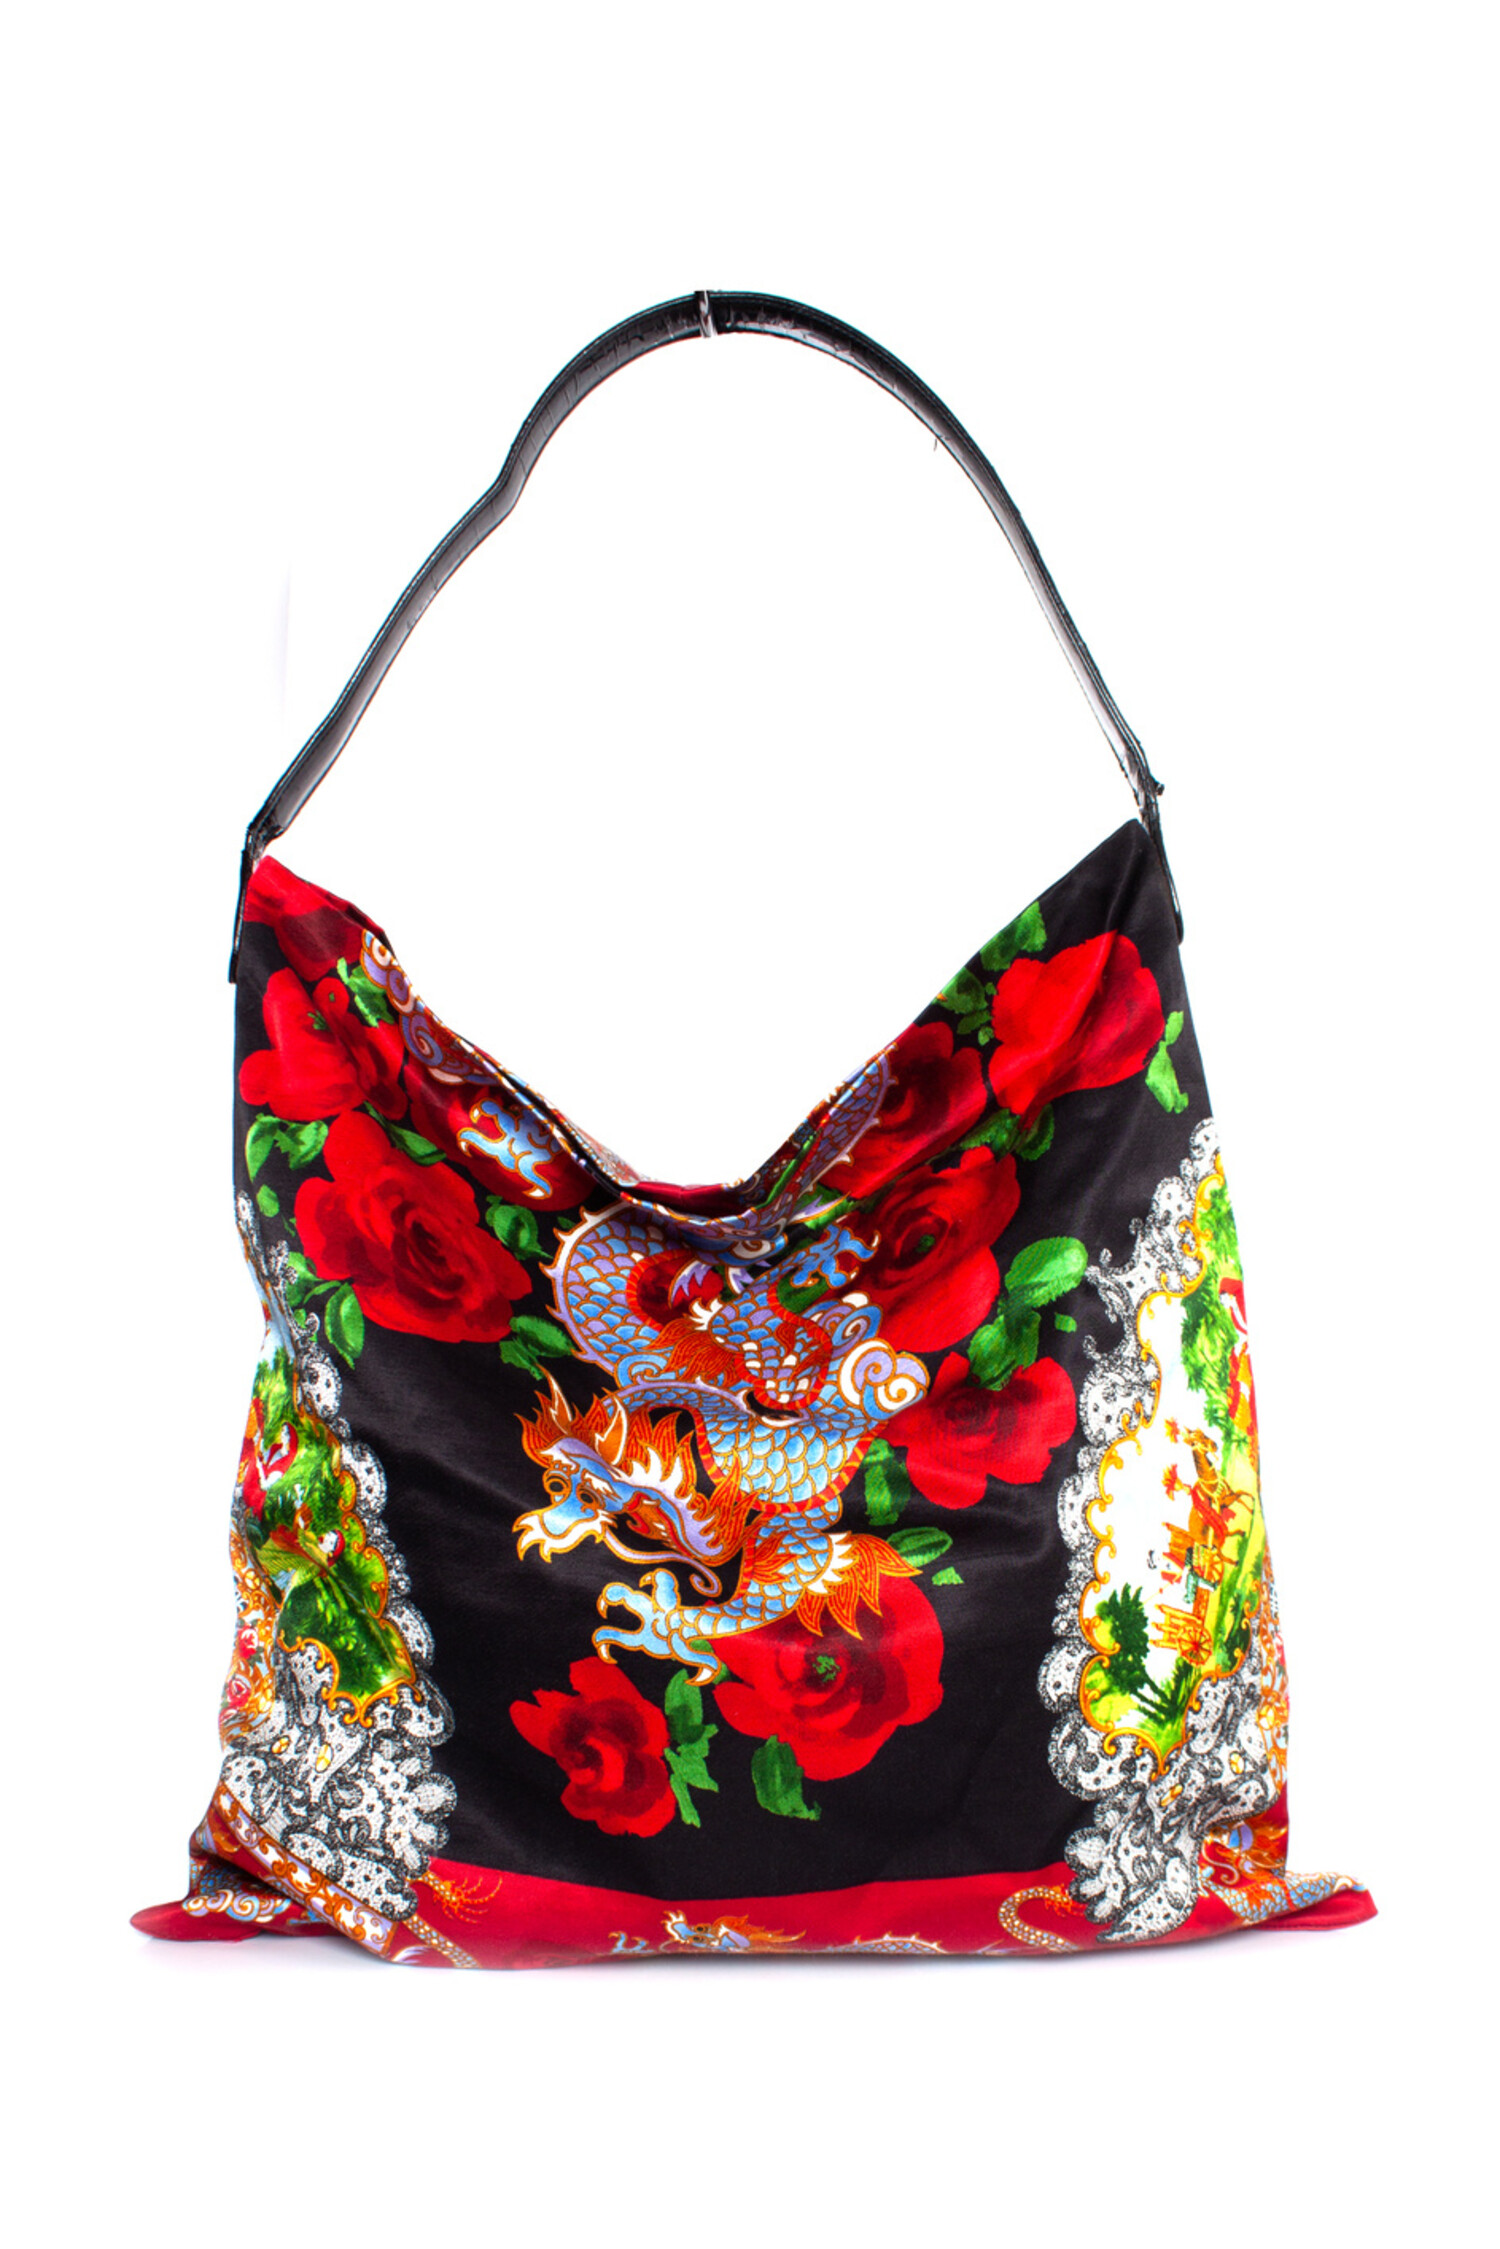 Dolce & Gabbana, Fabric tote bag with Chinese print - Unique Designer Pieces